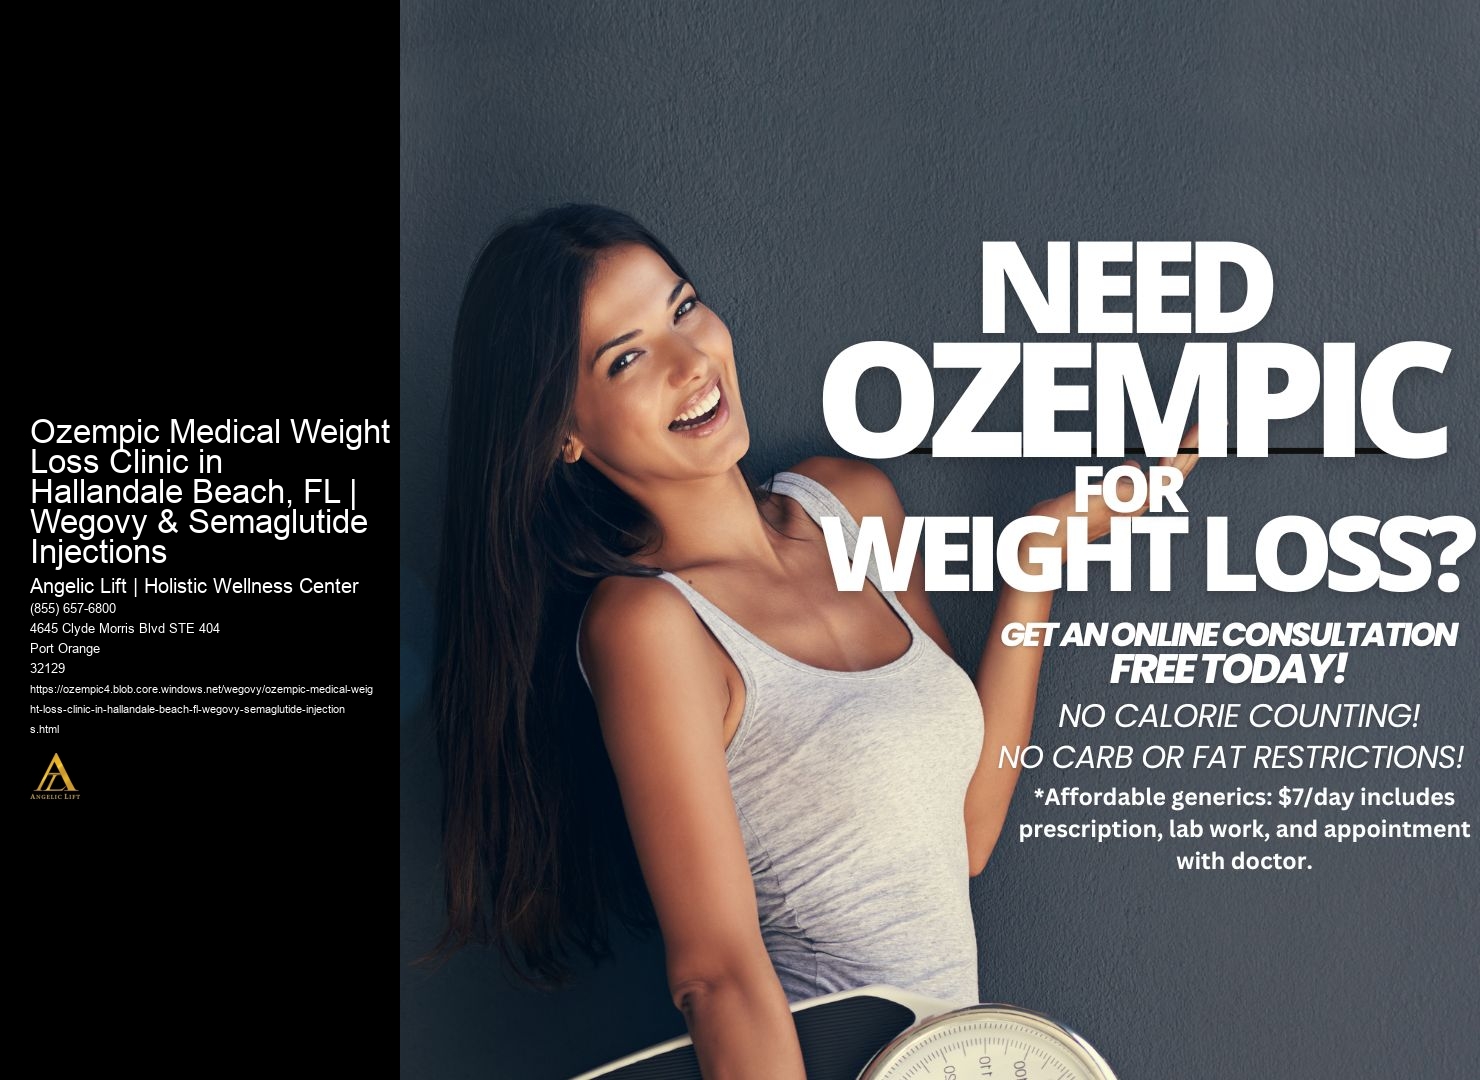 Ozempic Medical Weight Loss Clinic in Hallandale Beach, FL | Wegovy & Semaglutide Injections